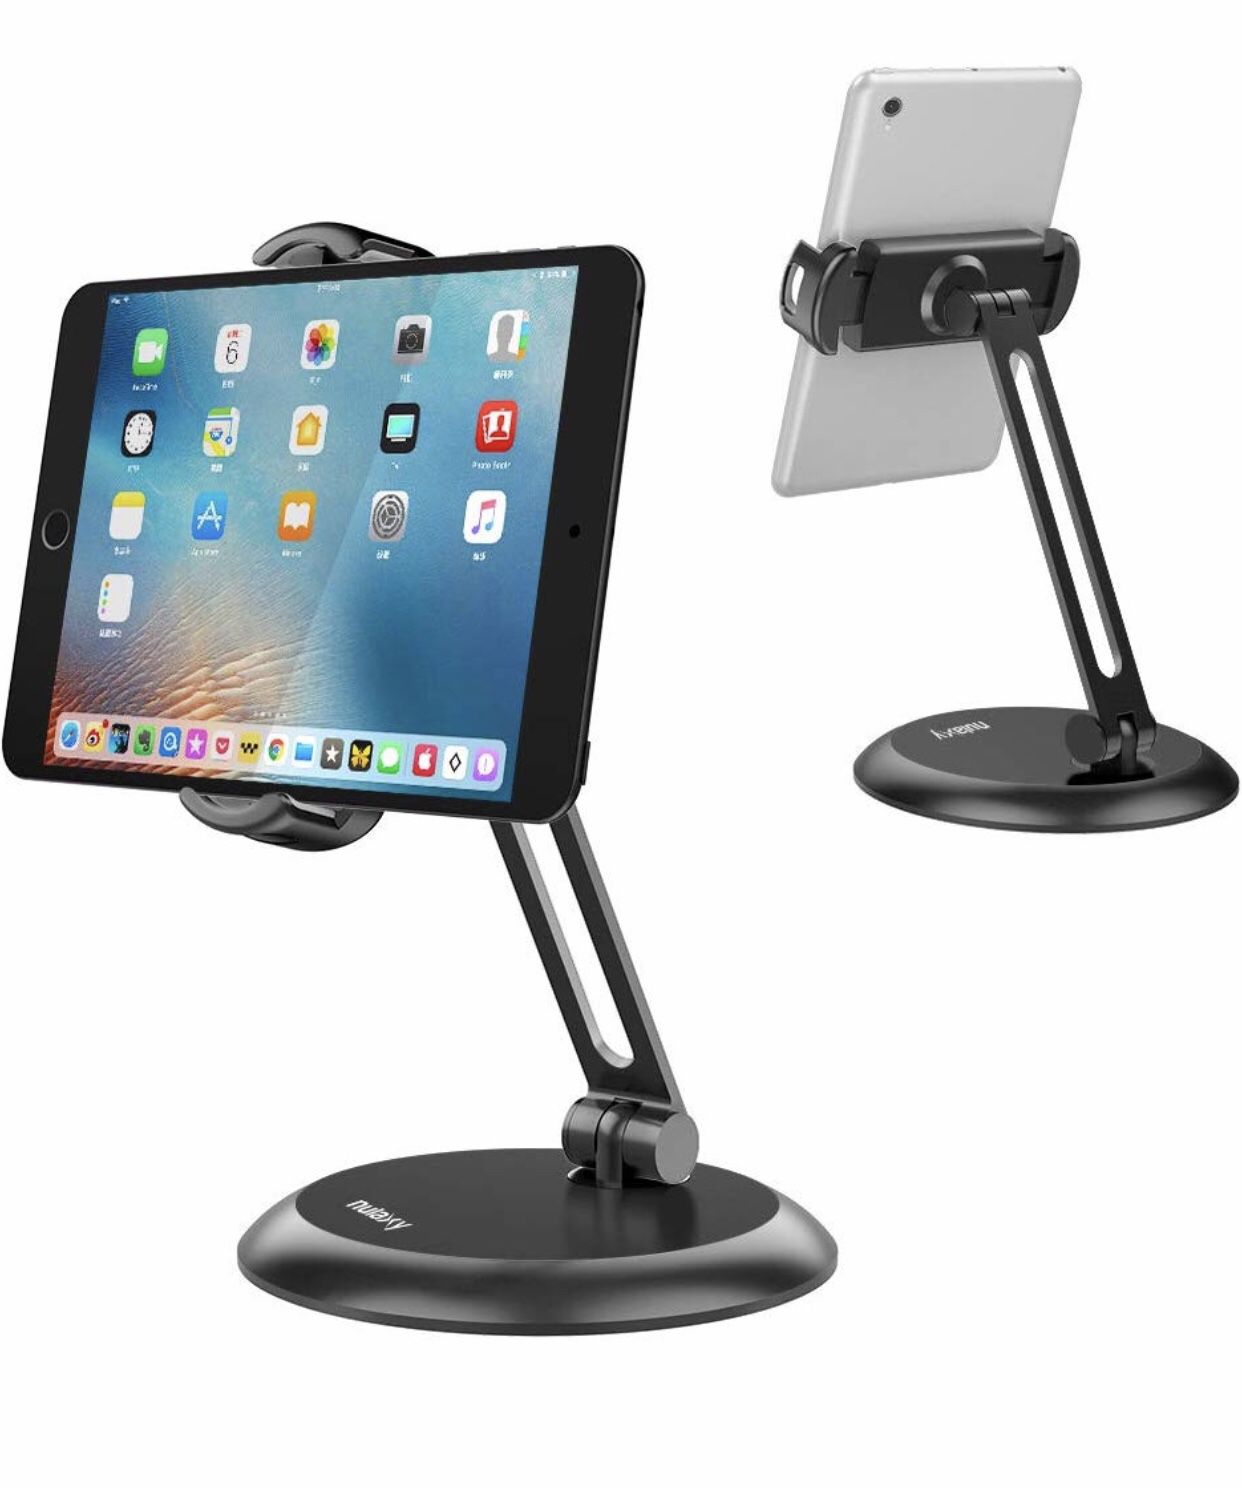 Nulaxy Tablet Stand, Adjustable Tablet Holder with Heavy Metal Base, Desktop Mount Recipe Holder Stand Compatible with 4-11" Phones, Tablets, iPad, N